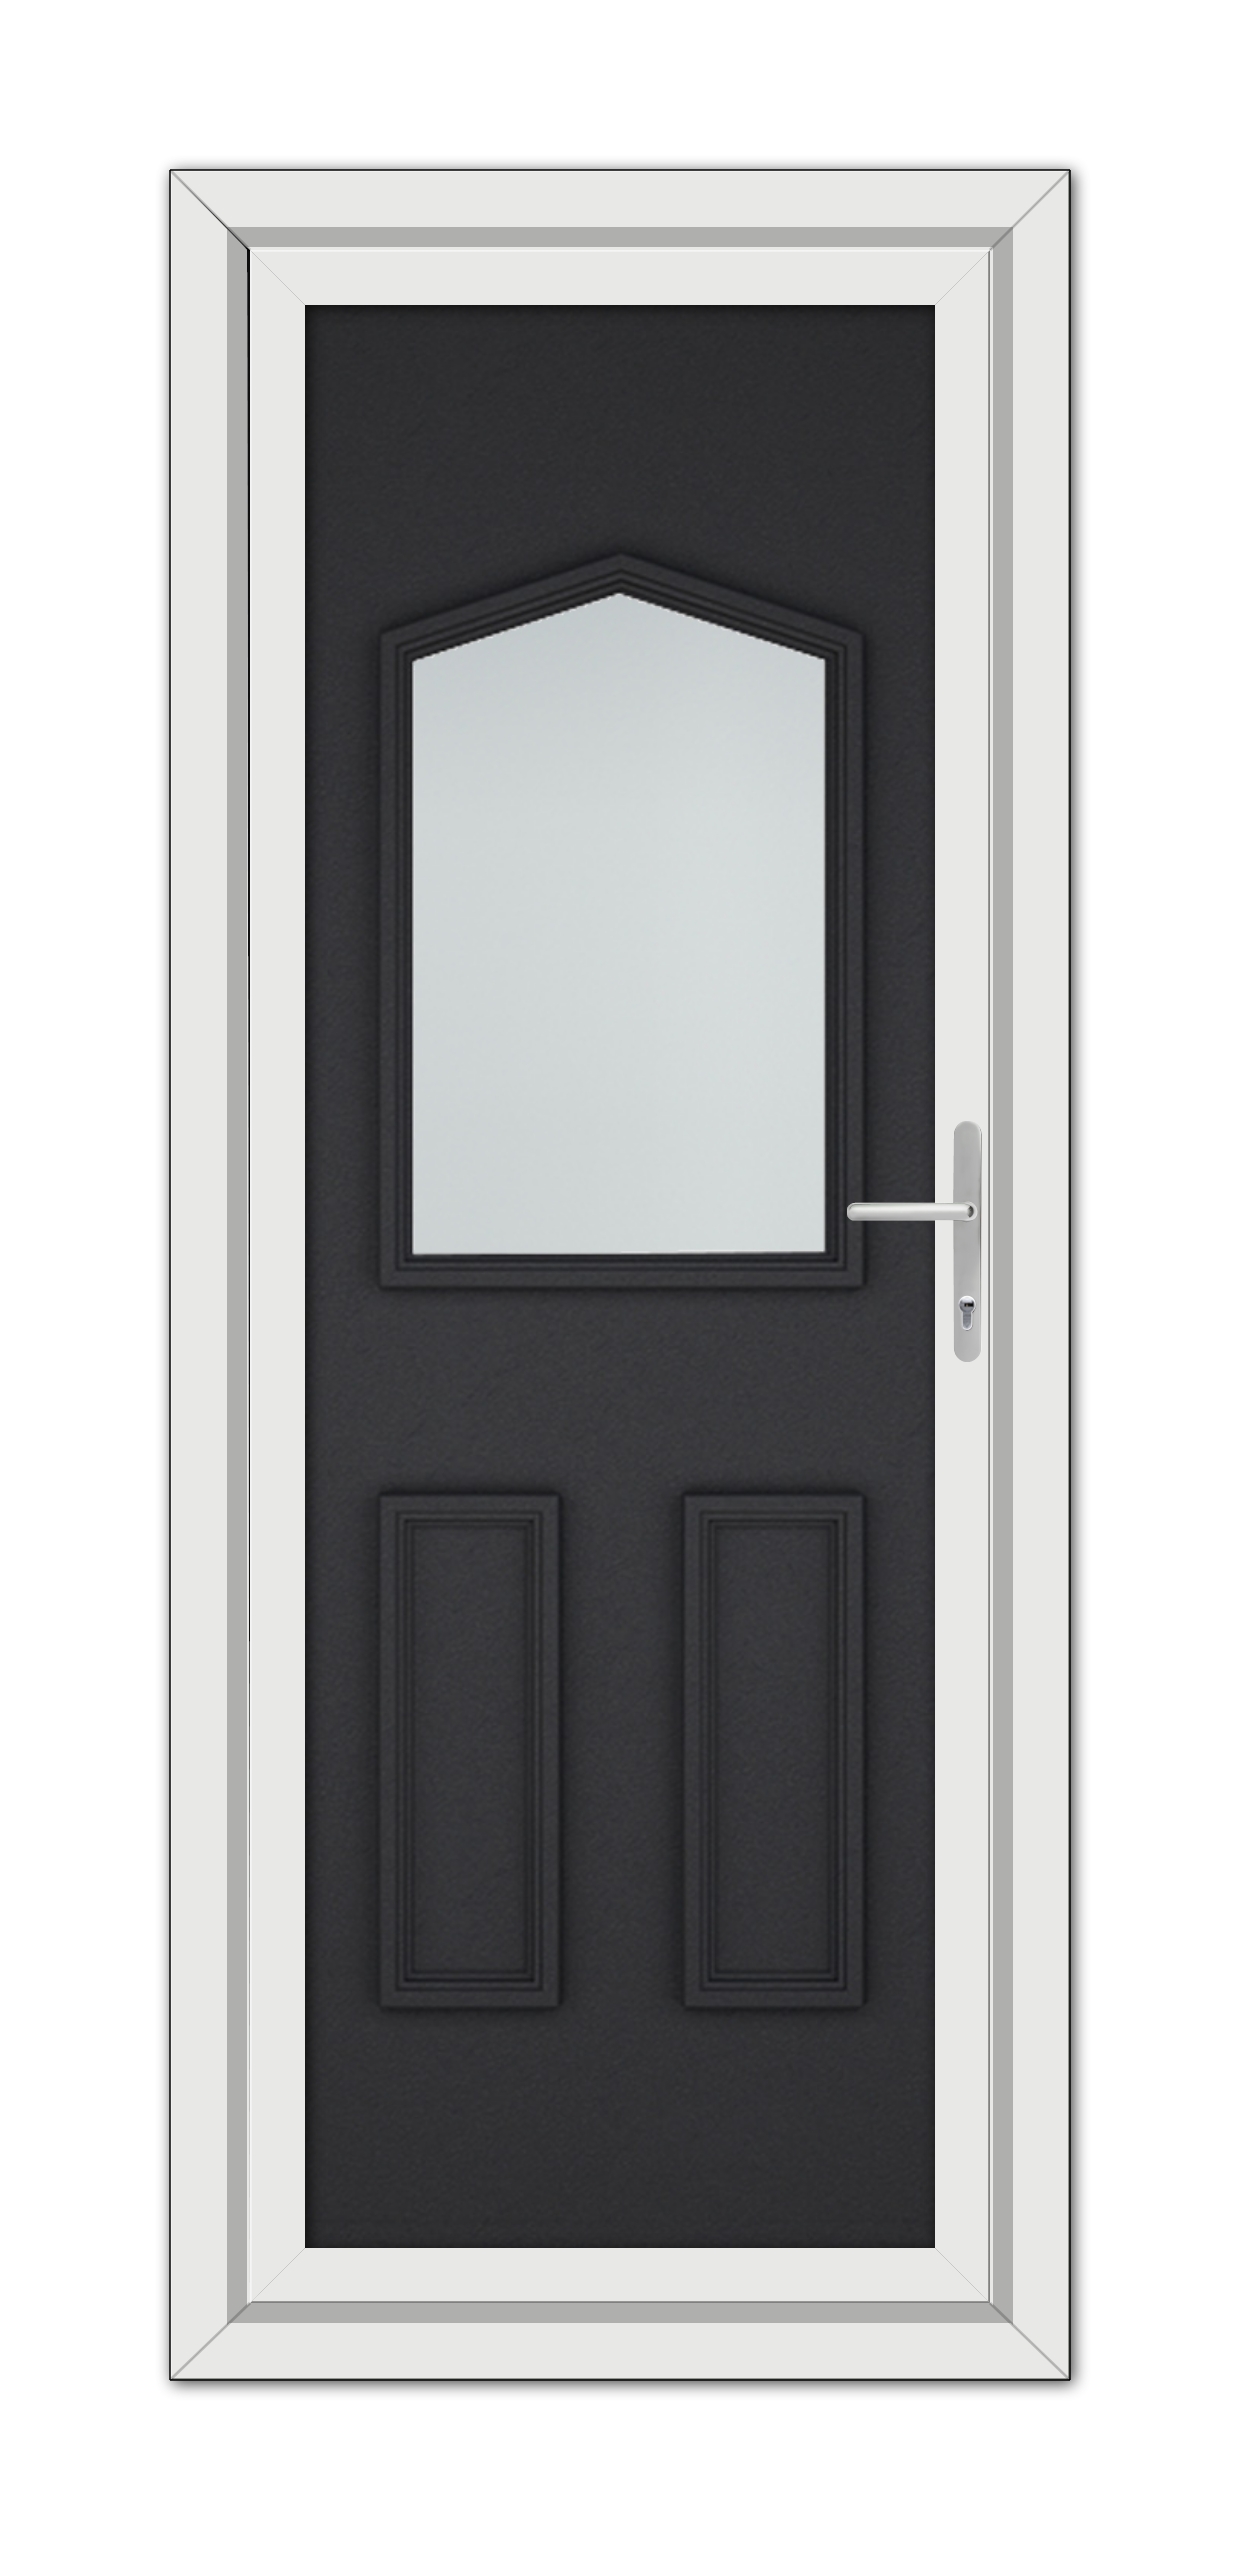 A modern Black Brown Oxford uPVC Door with a top arched window, two recessed panels, and a silver handle, framed by white trim.